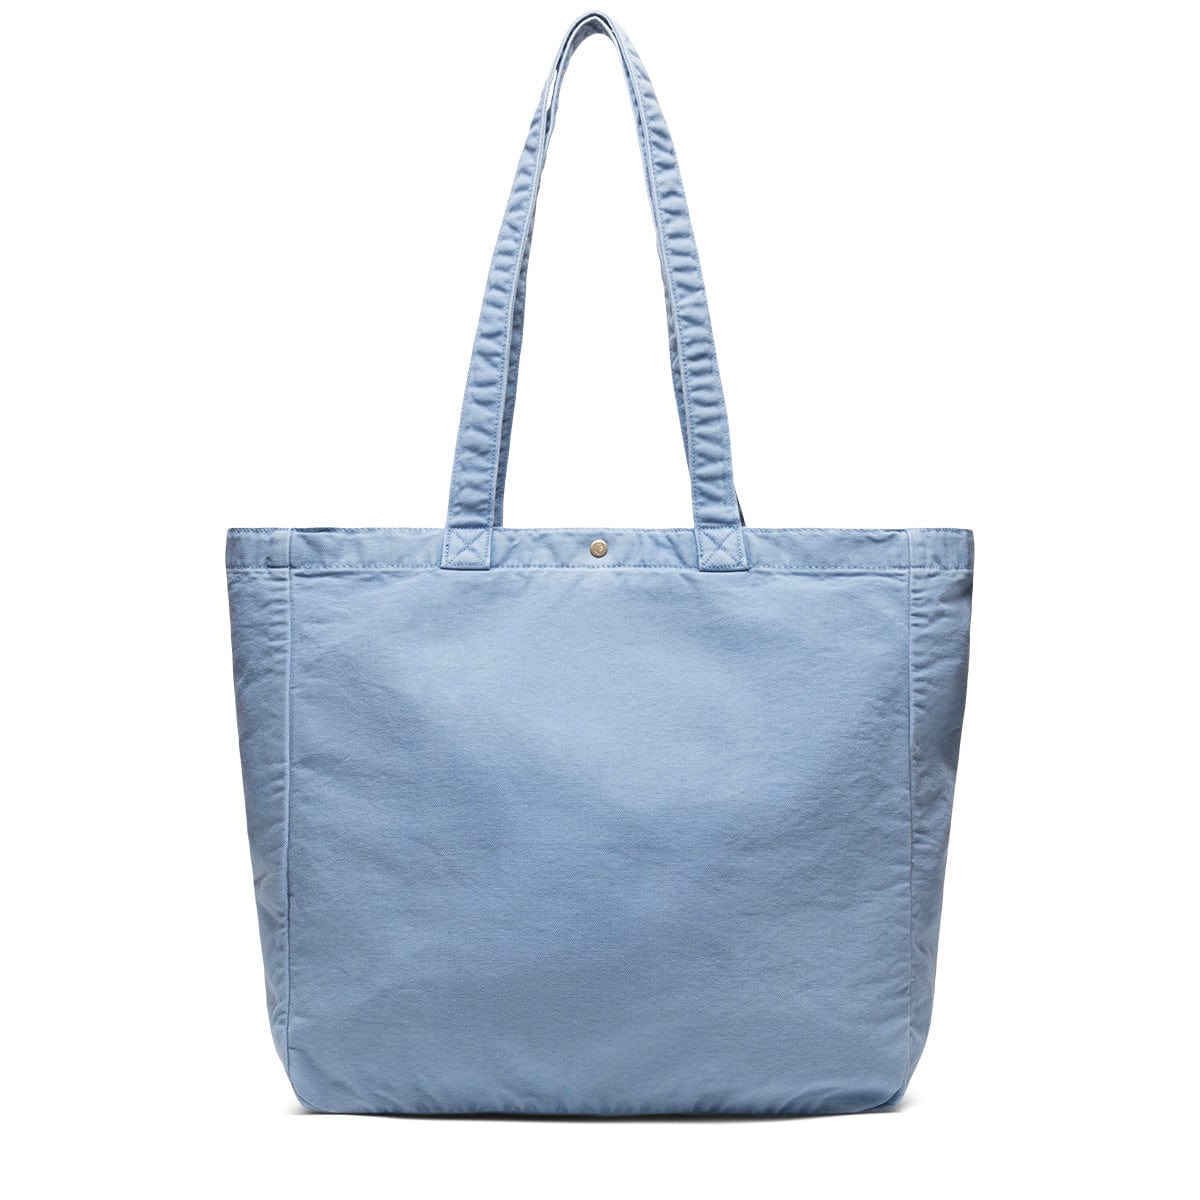 Carhartt WIP Bags PISCINE FADED / O/S BAYFIELD TOTE